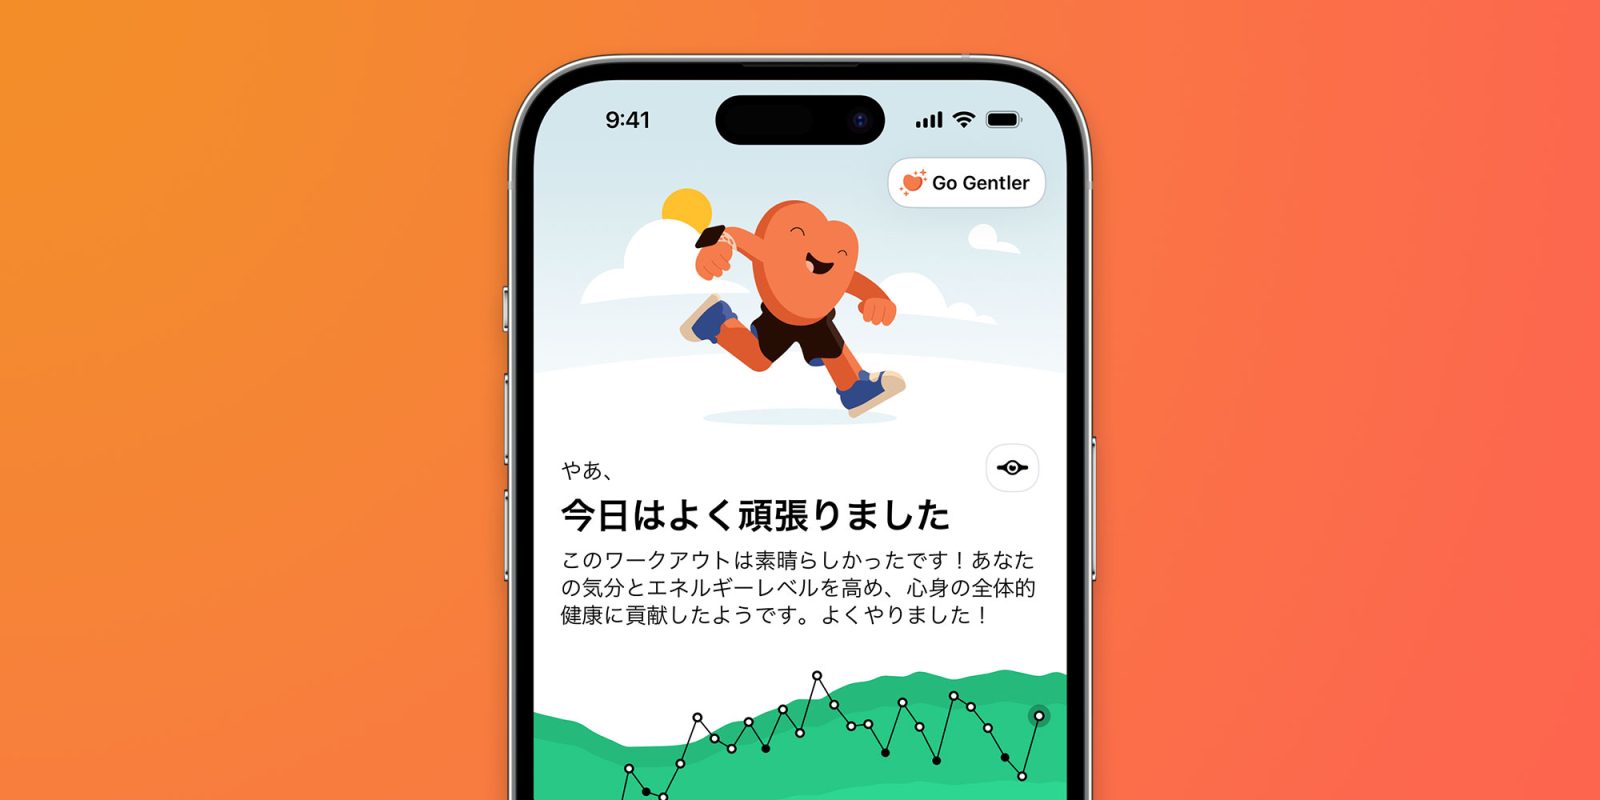 Fitness and wellness app Gentler Streak updated with support for more languages